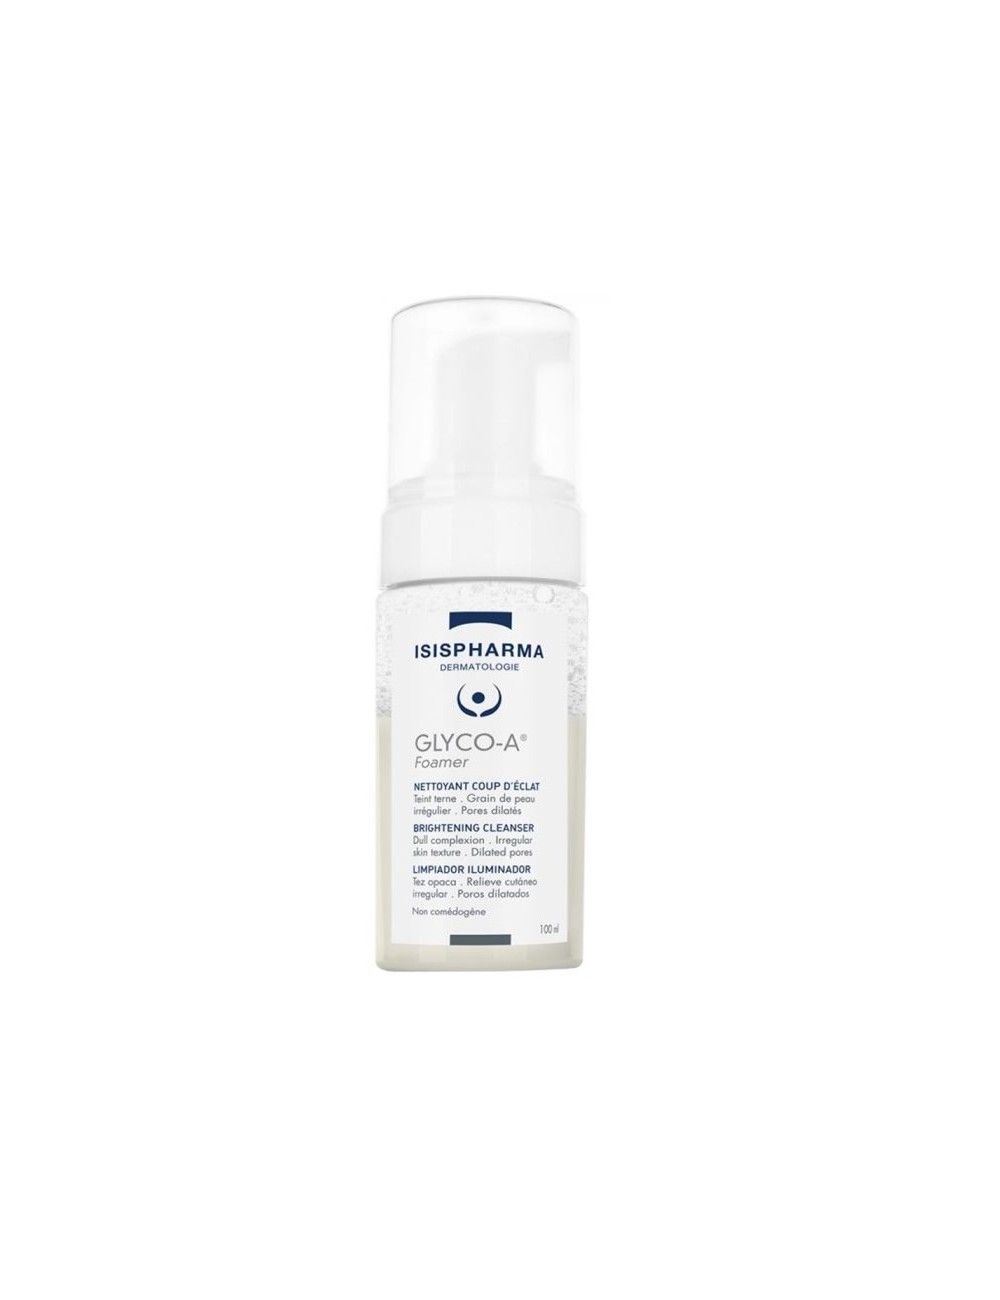 IRIIS phytoprotection - Fiche technique, Brome inerme - Smooth